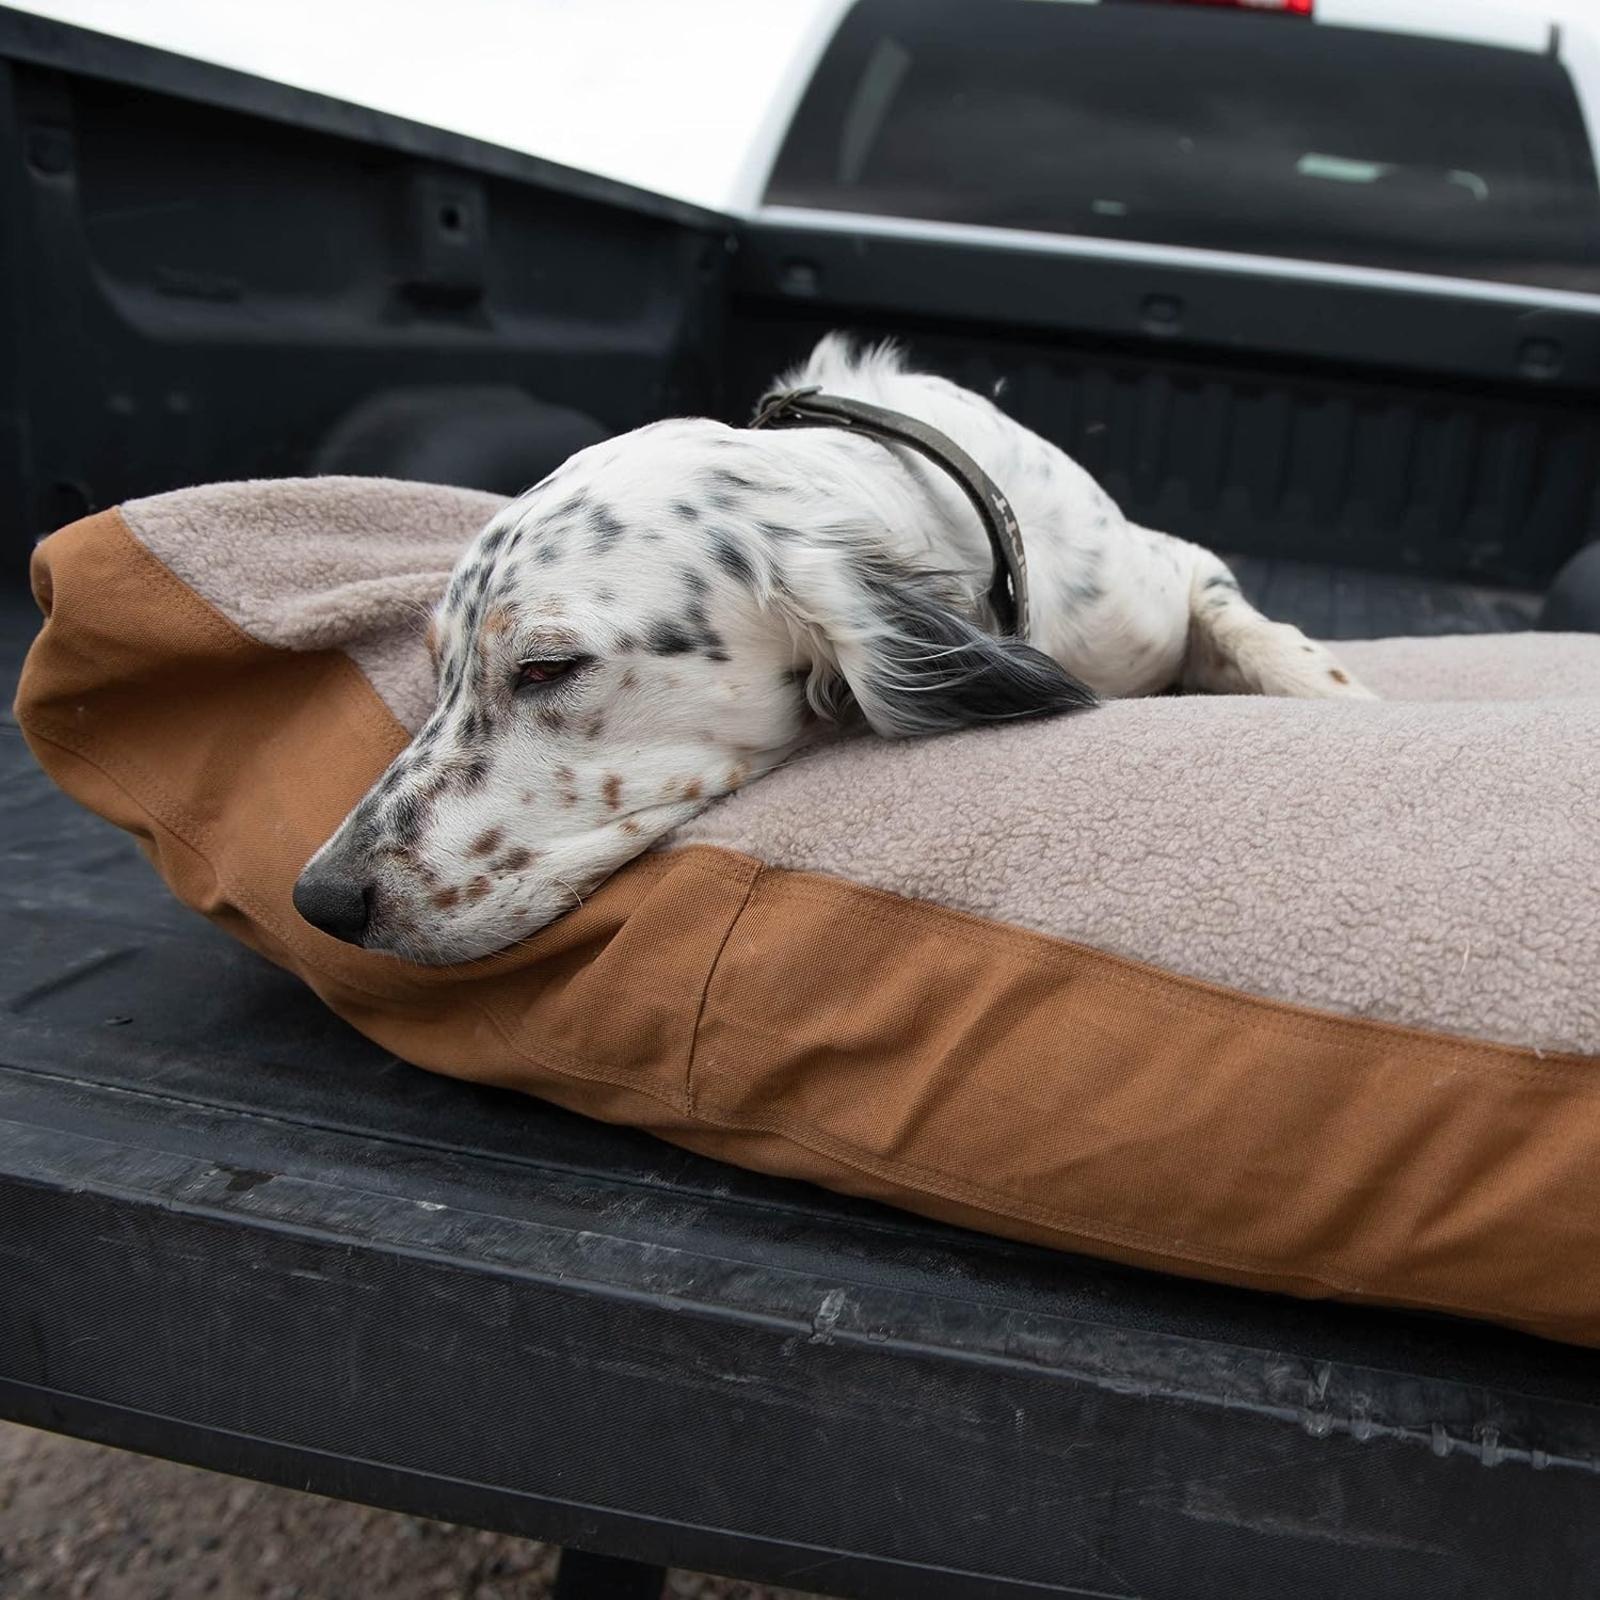 Carhartt Firm Duck Dog Bed dog on the bed view